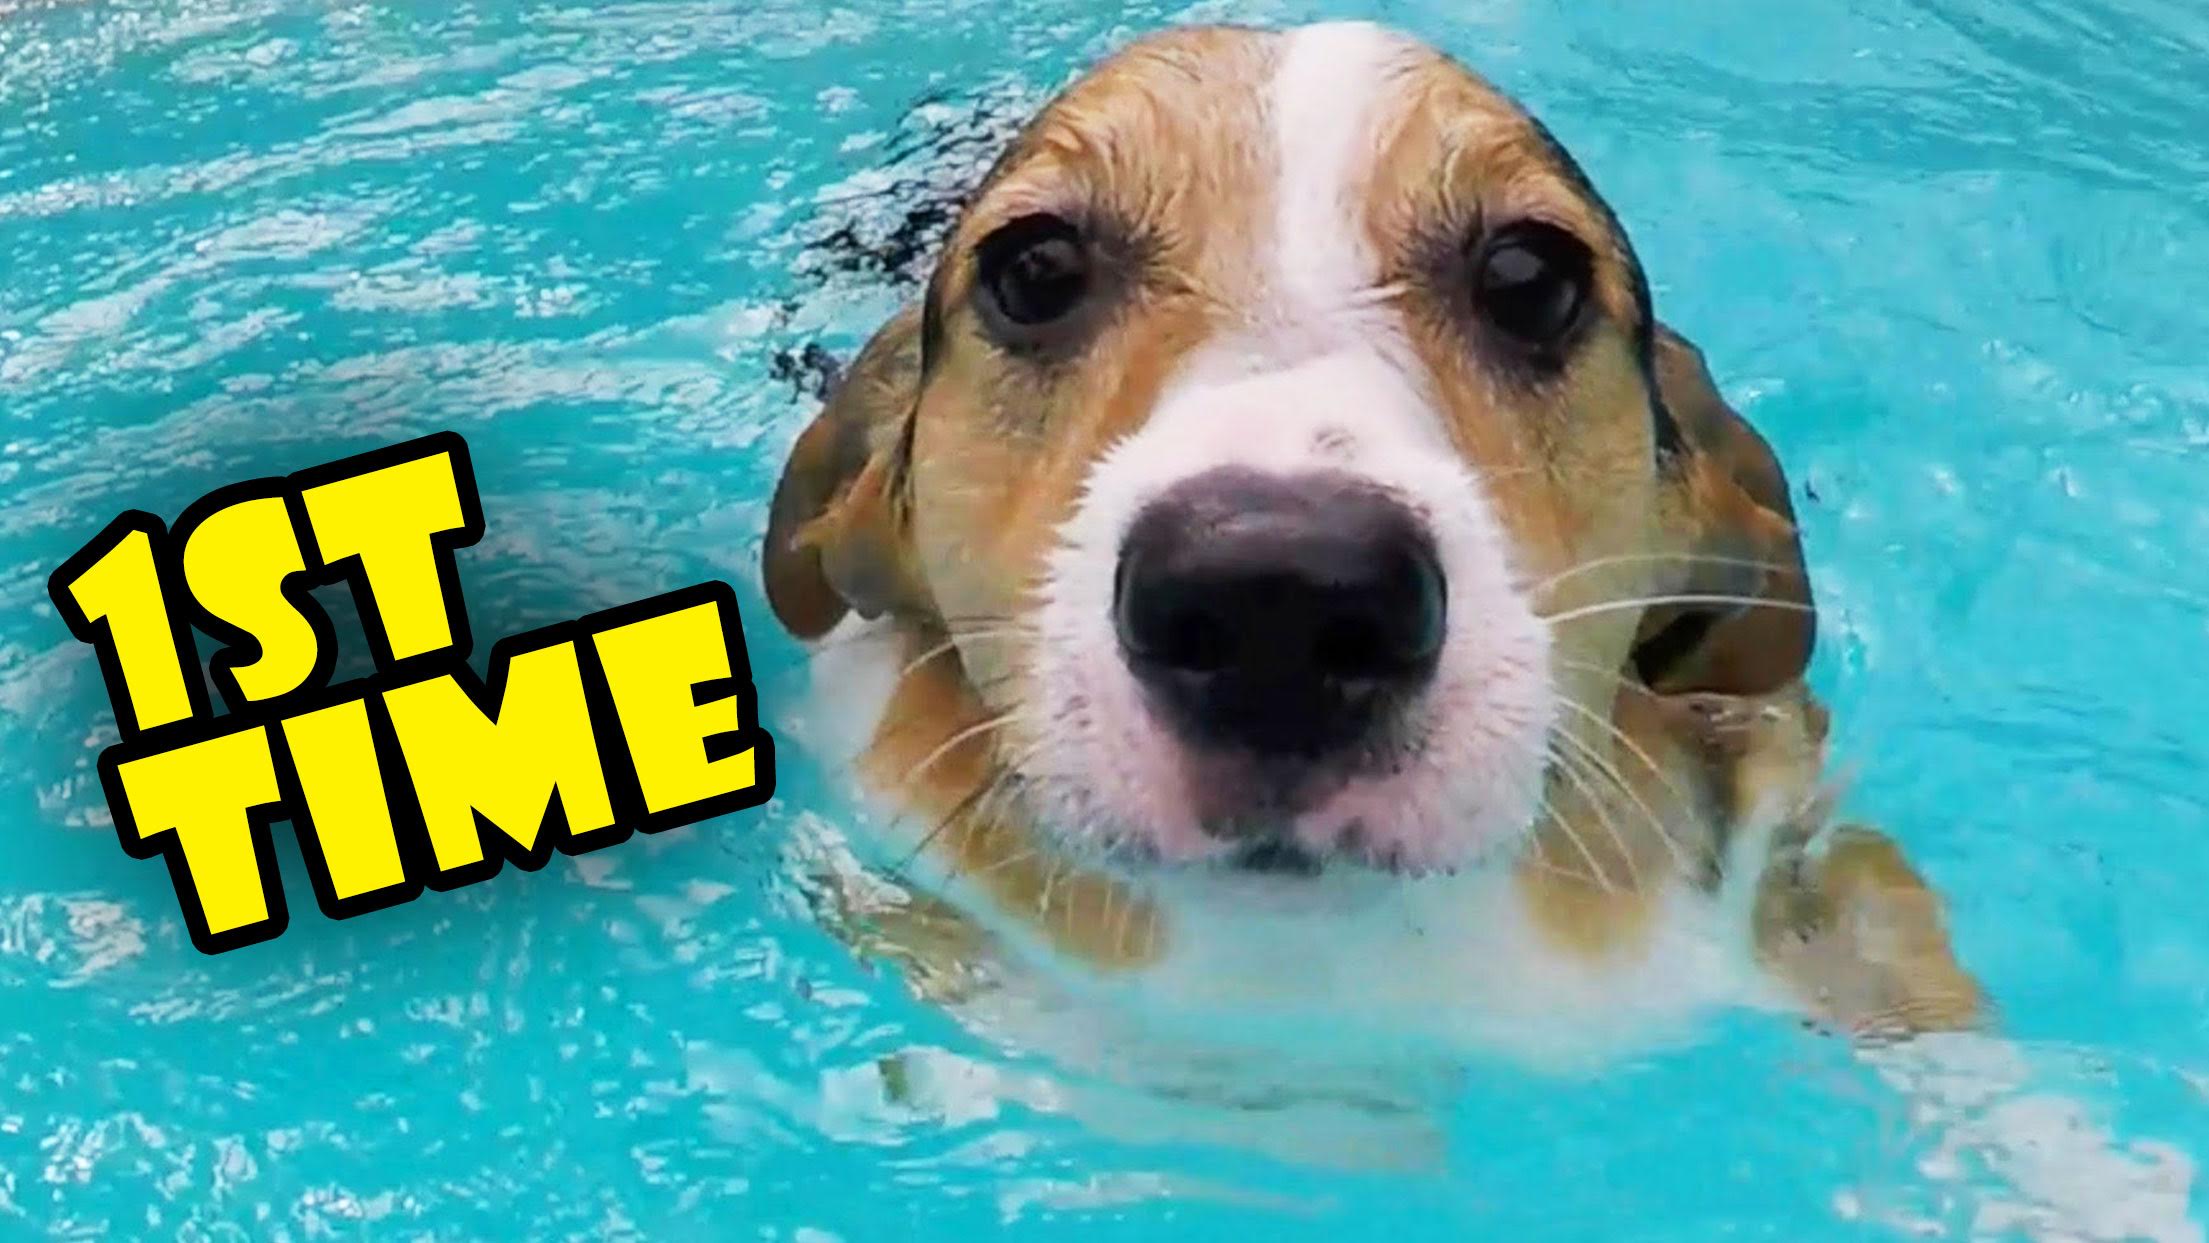 CORGI TRIES SWIMMING LESSONS FOR THE 1ST TIME